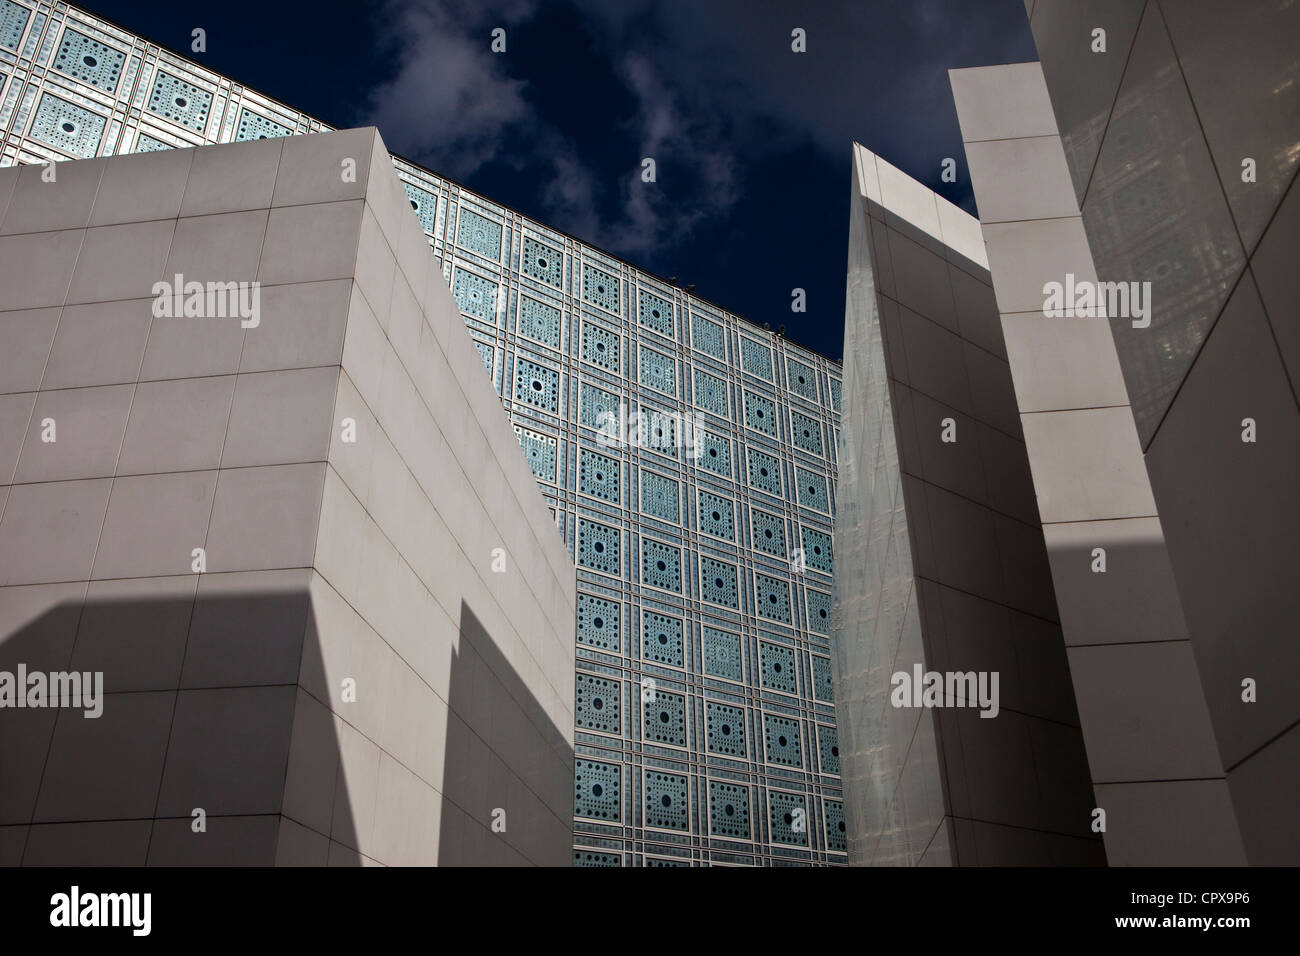 Exterior of the Institut du Monde Arabe (IMA) or Arab World Institute (AWI), Paris, France by Architect Jean Nouvel. Stock Photo